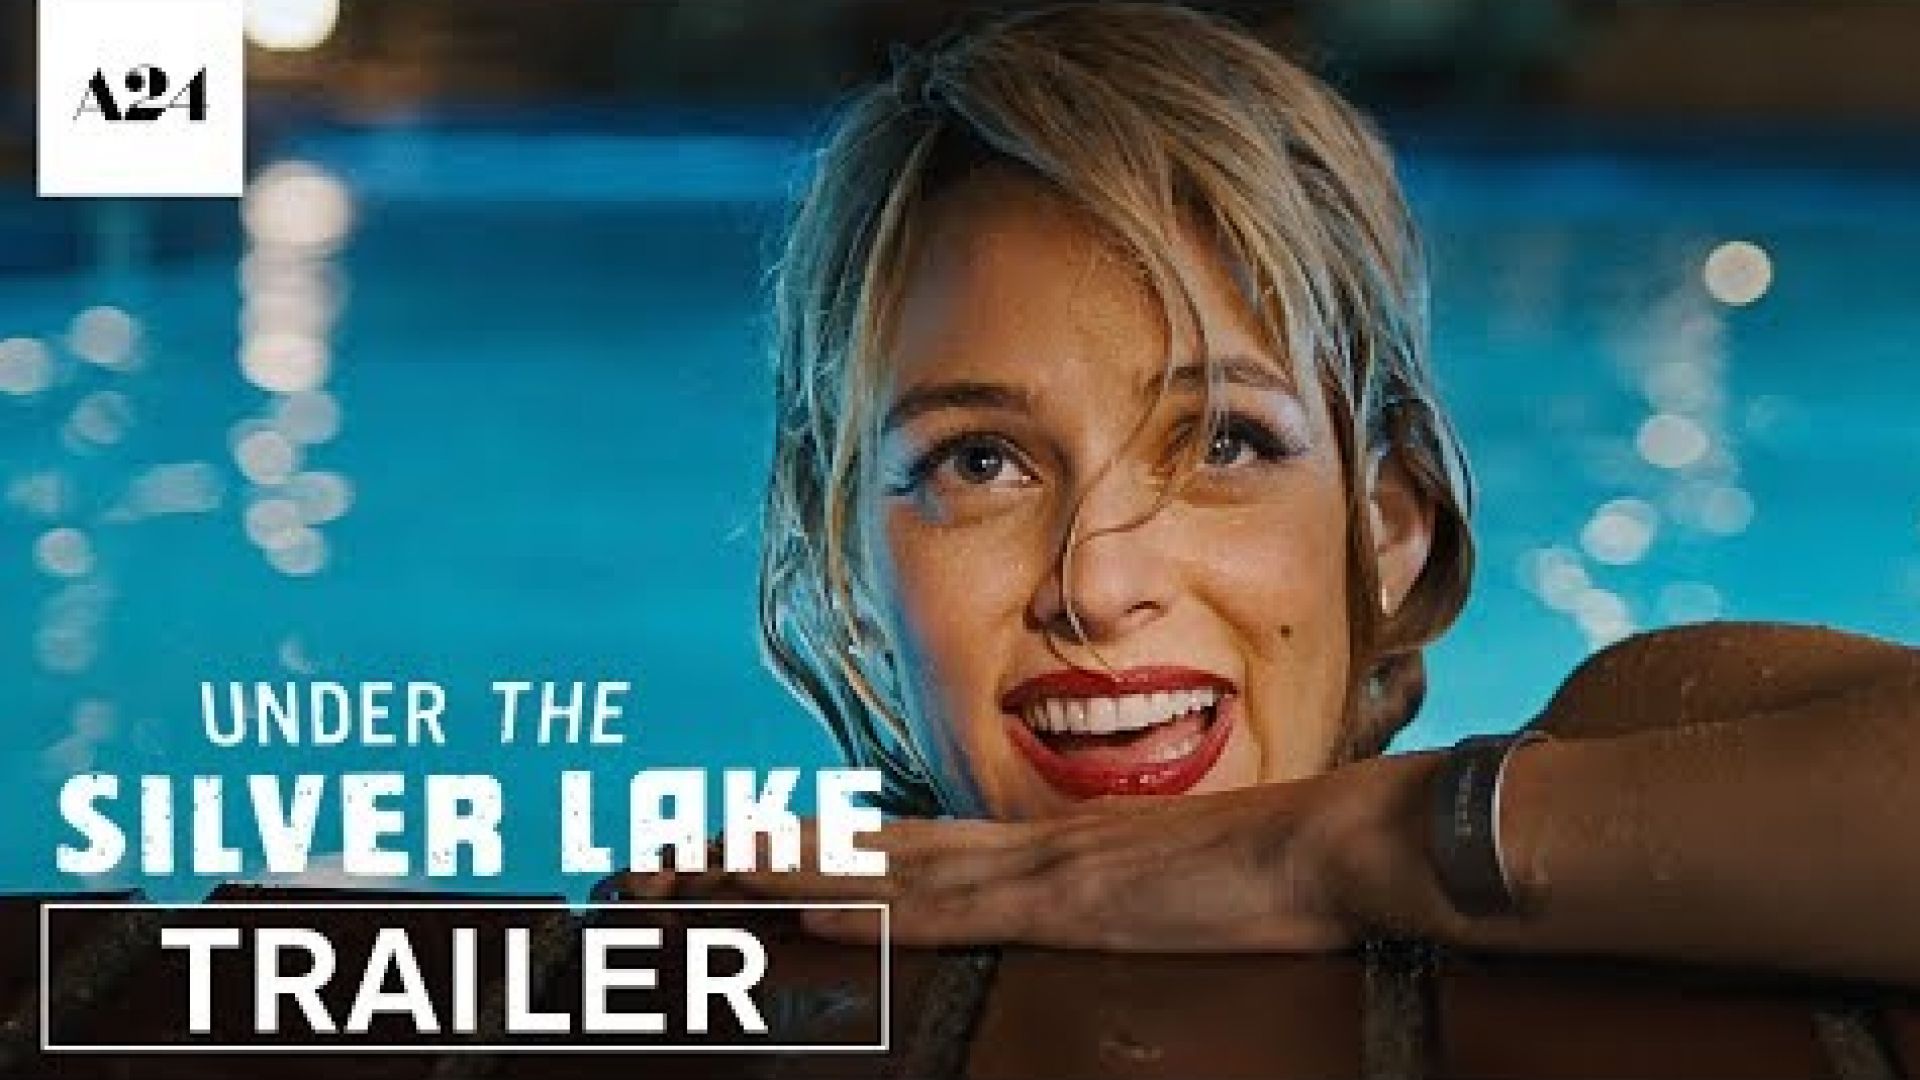 Under The Silver Lake Trailer ⎮ A24